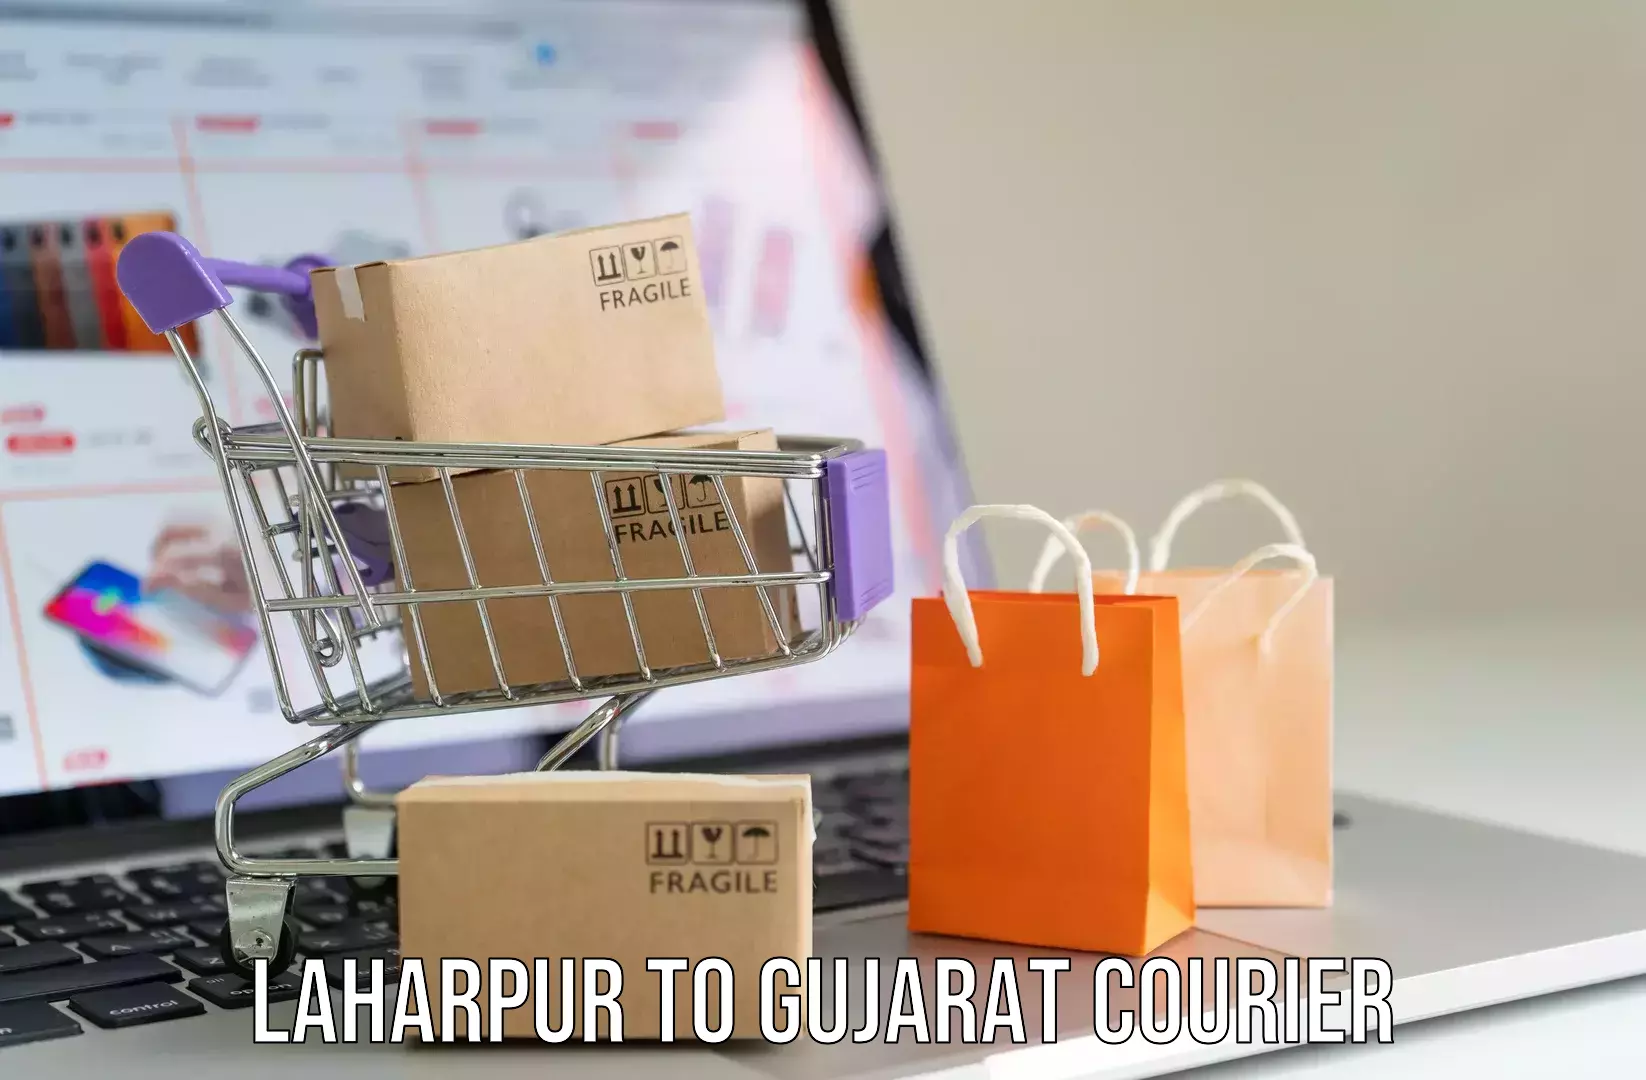 Baggage transport network Laharpur to Anand Agricultural University